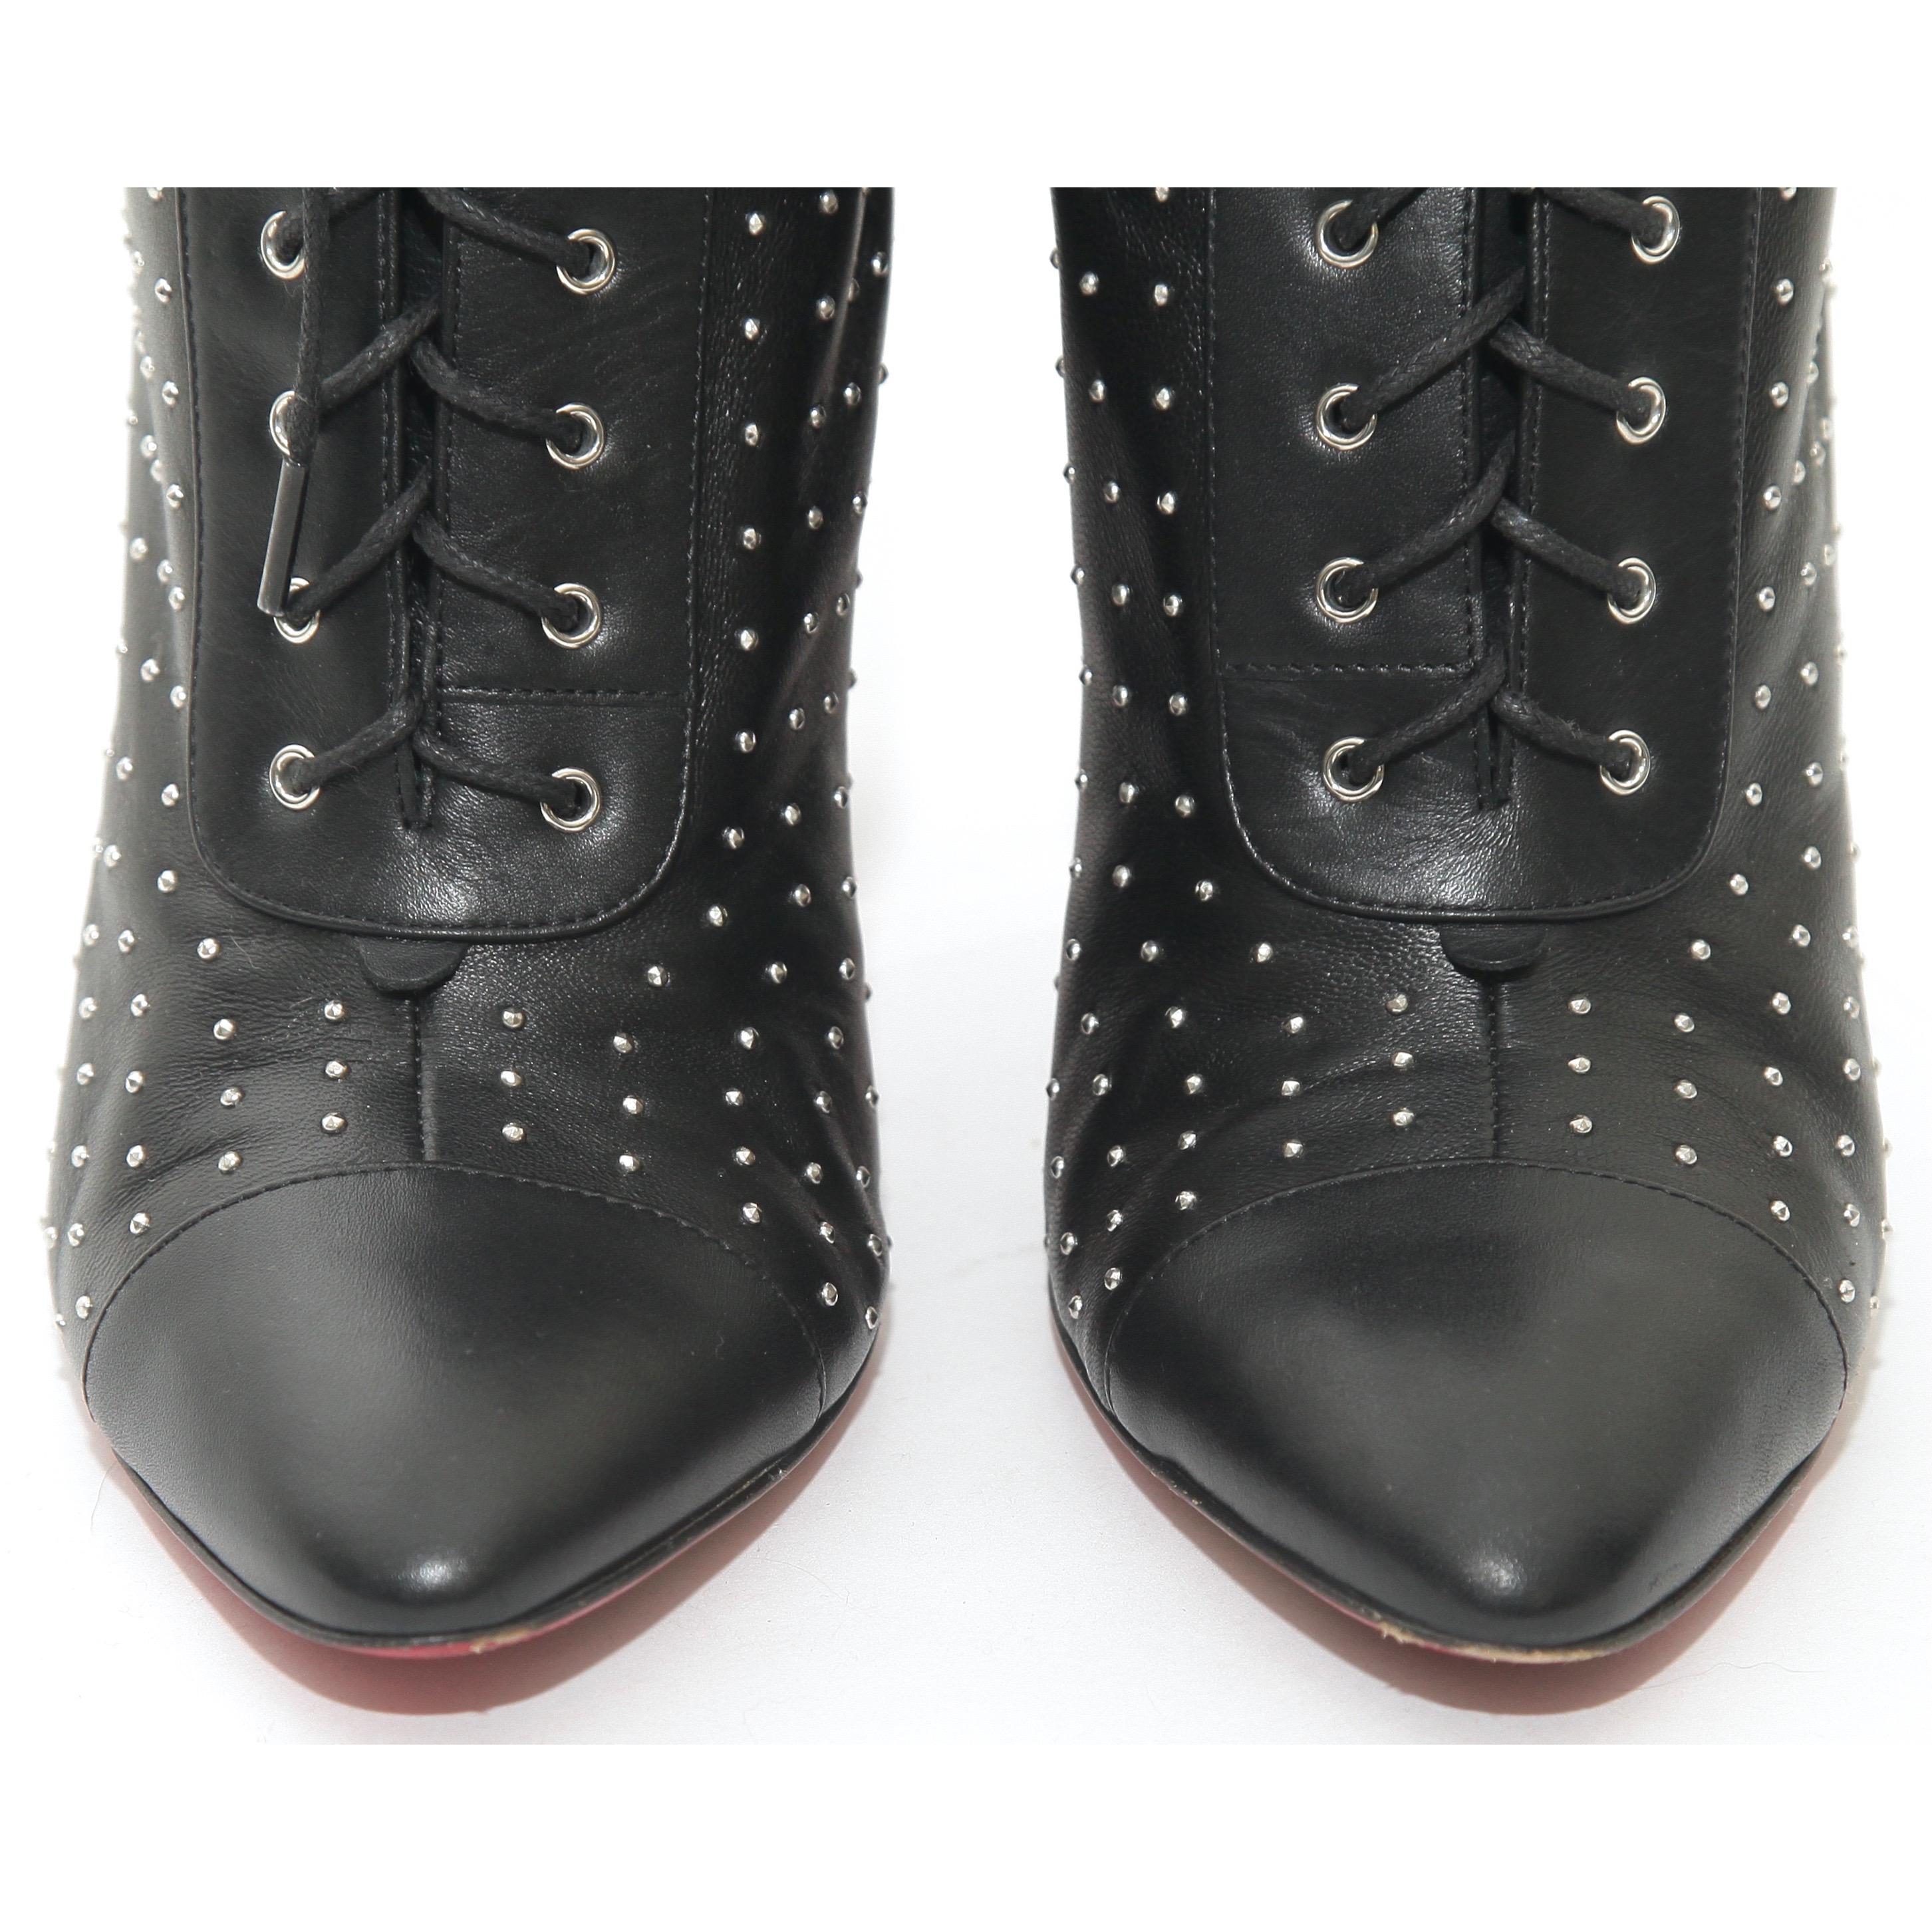 CHRISTIAN LOUBOUTIN Black Leather Ankle Boot Silver Studs Lace Up Toe Sz 38.5 In Good Condition For Sale In Hollywood, FL